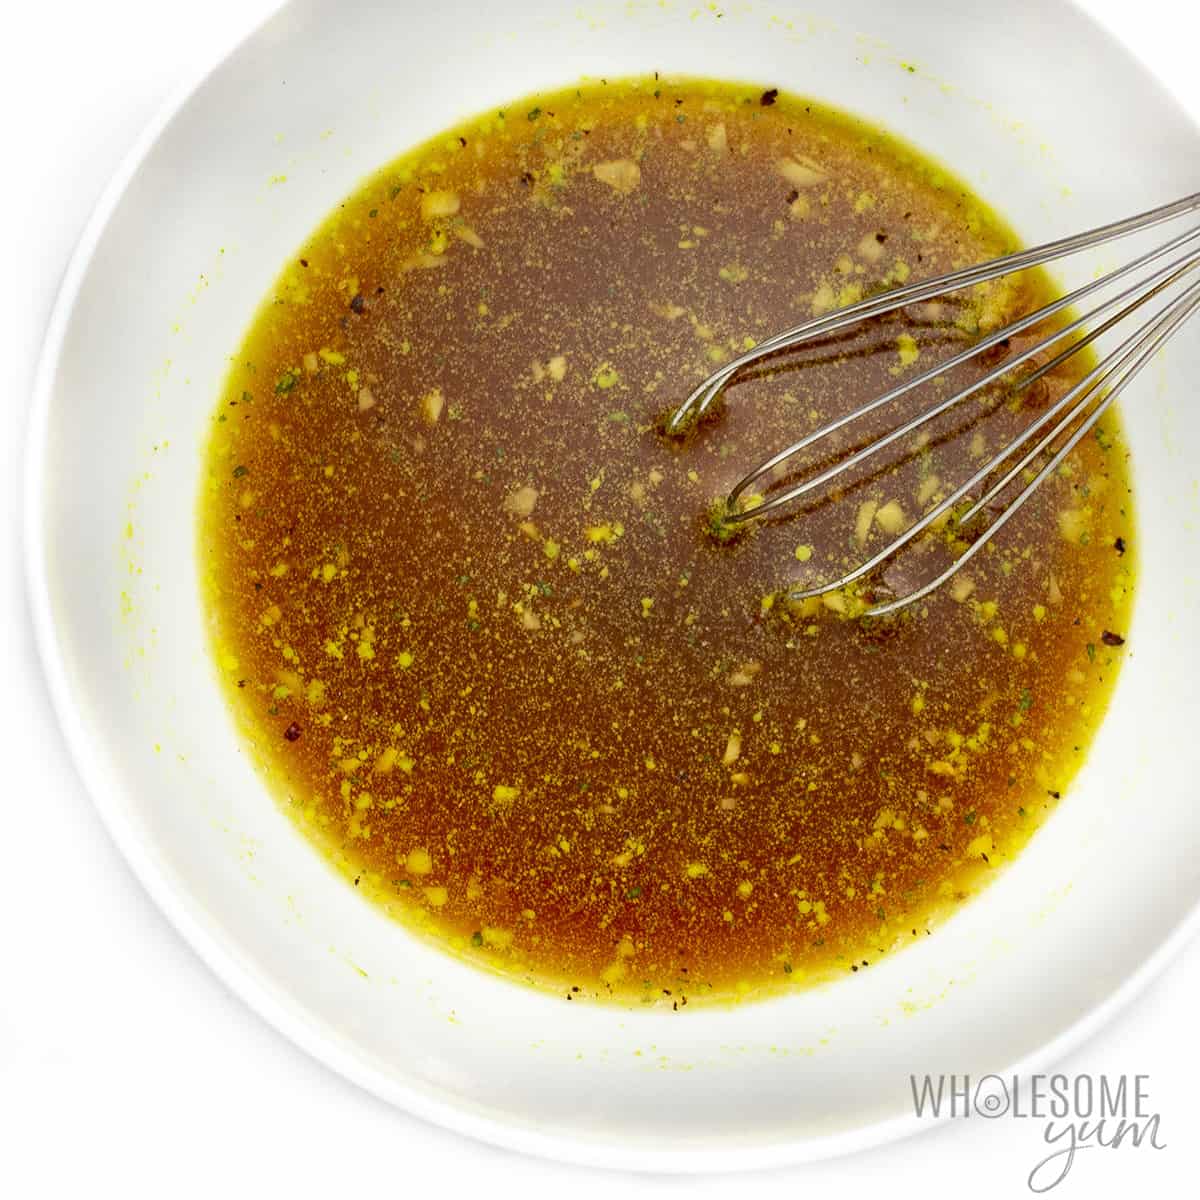 Stir fry sauce in small bowl with whisk.